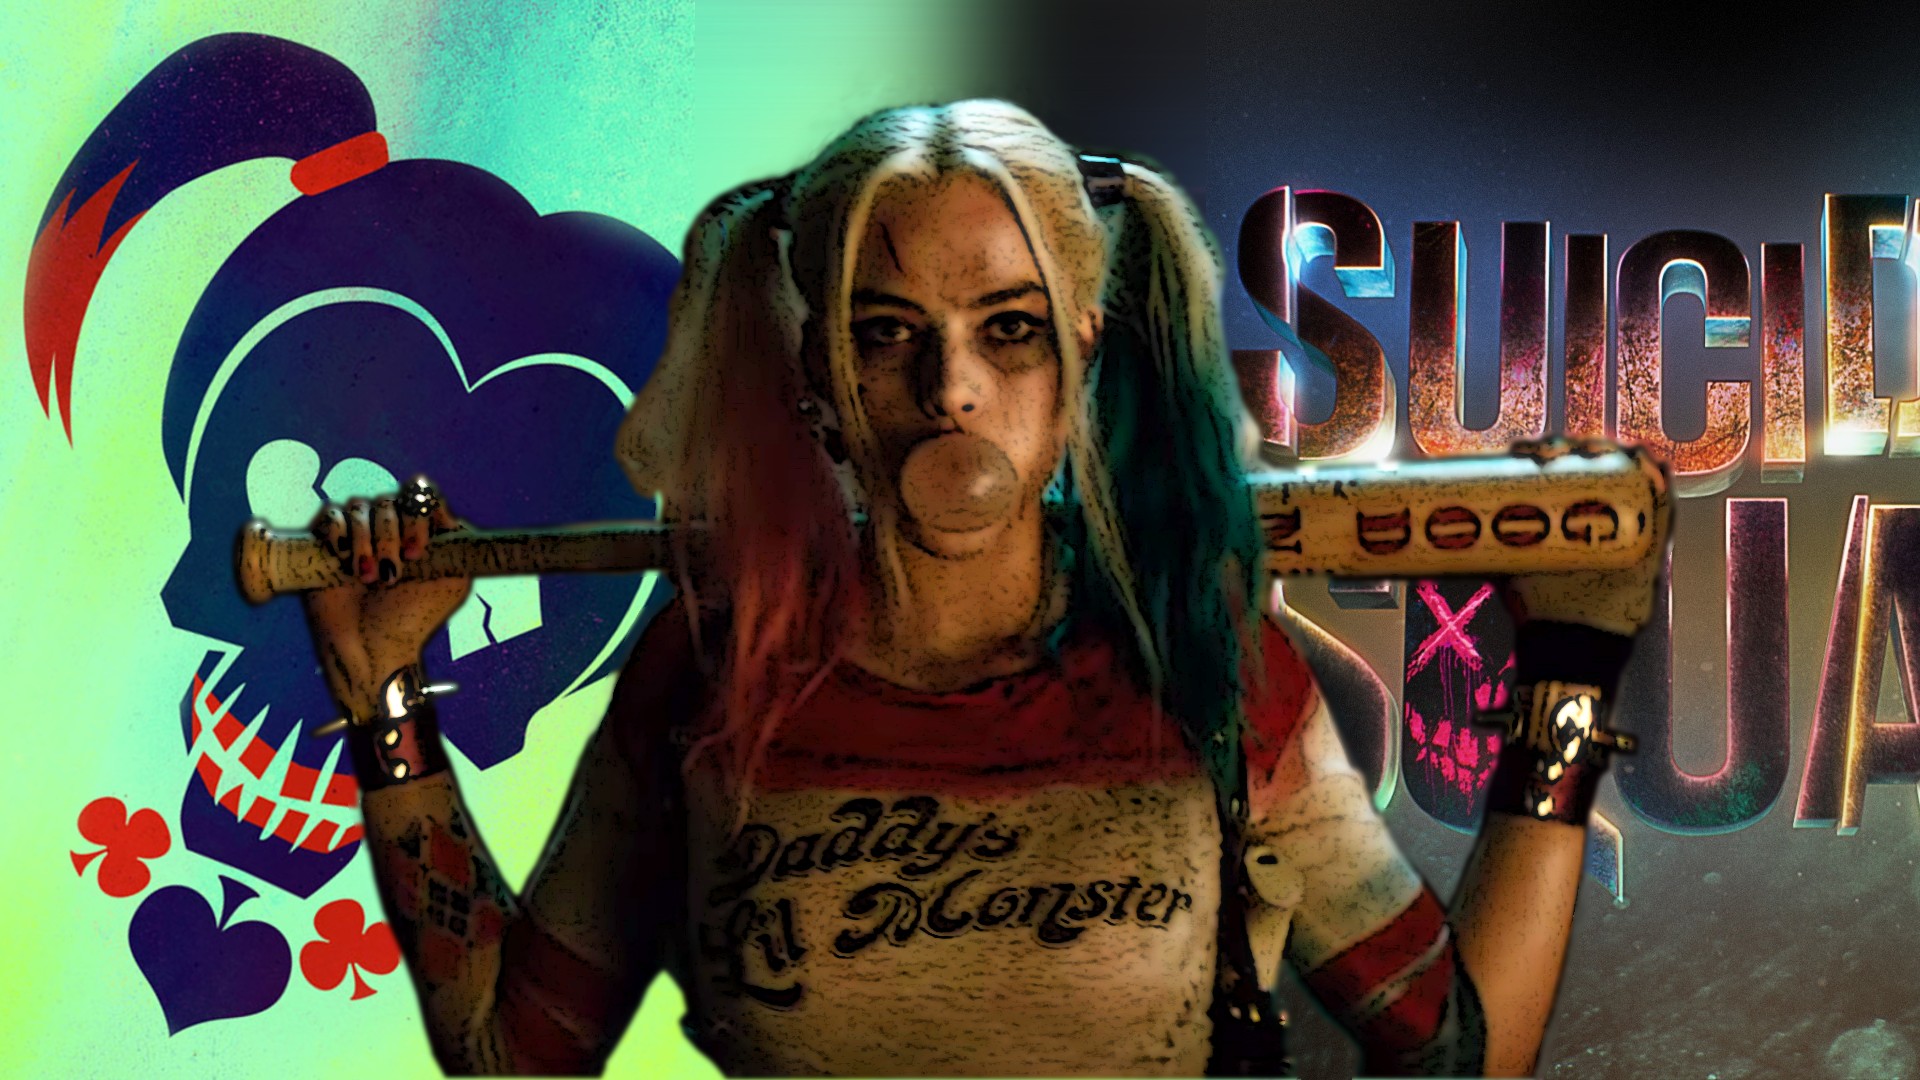 HD Wallpaper Harley Quinn Movie With Resolution 1920X1080 pixel. You can make this wallpaper for your Desktop Computer Backgrounds, Mac Wallpapers, Android Lock screen or iPhone Screensavers